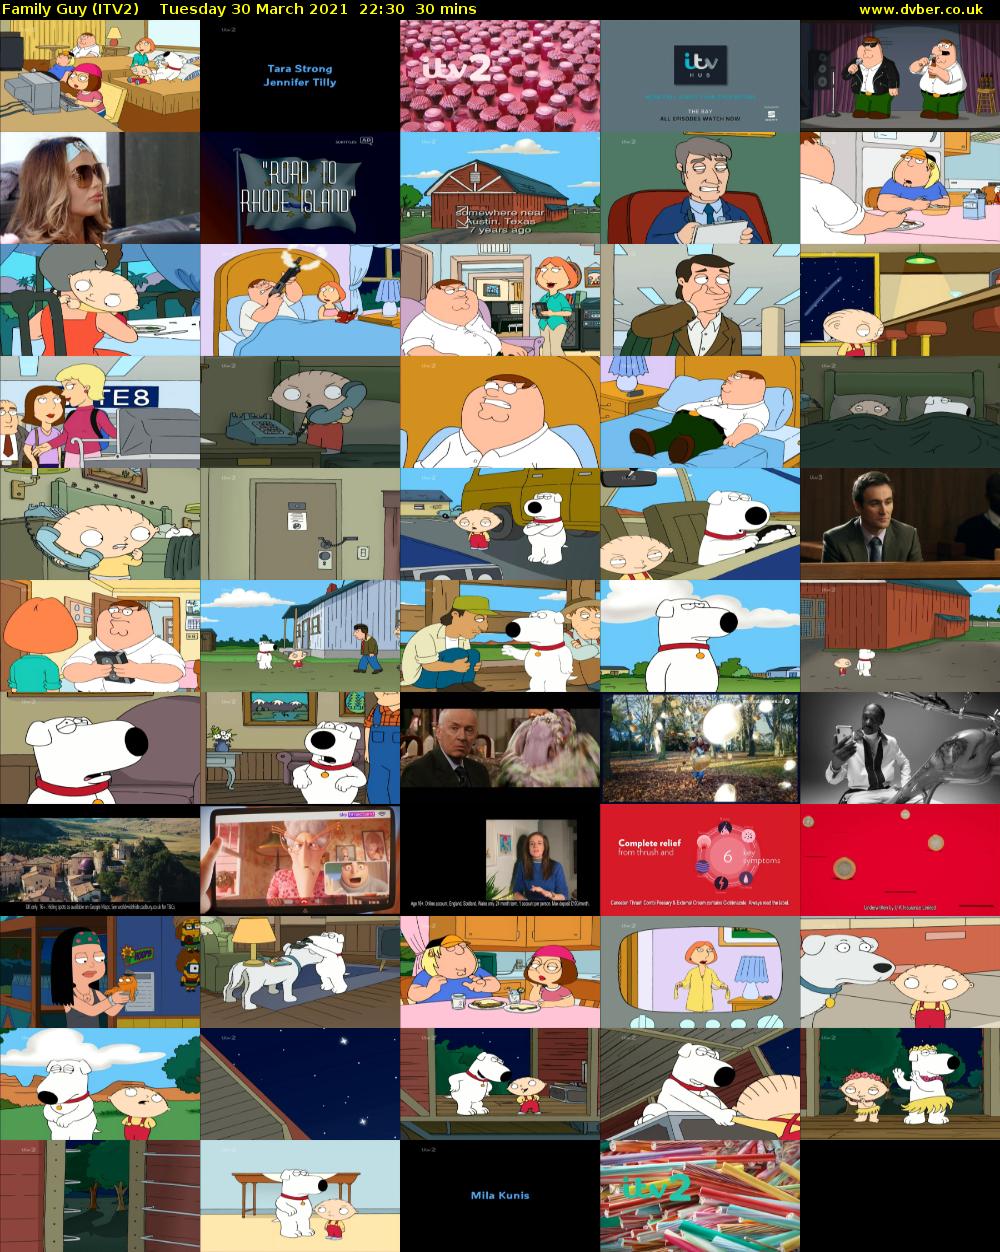 Family Guy (ITV2) Tuesday 30 March 2021 22:30 - 23:00